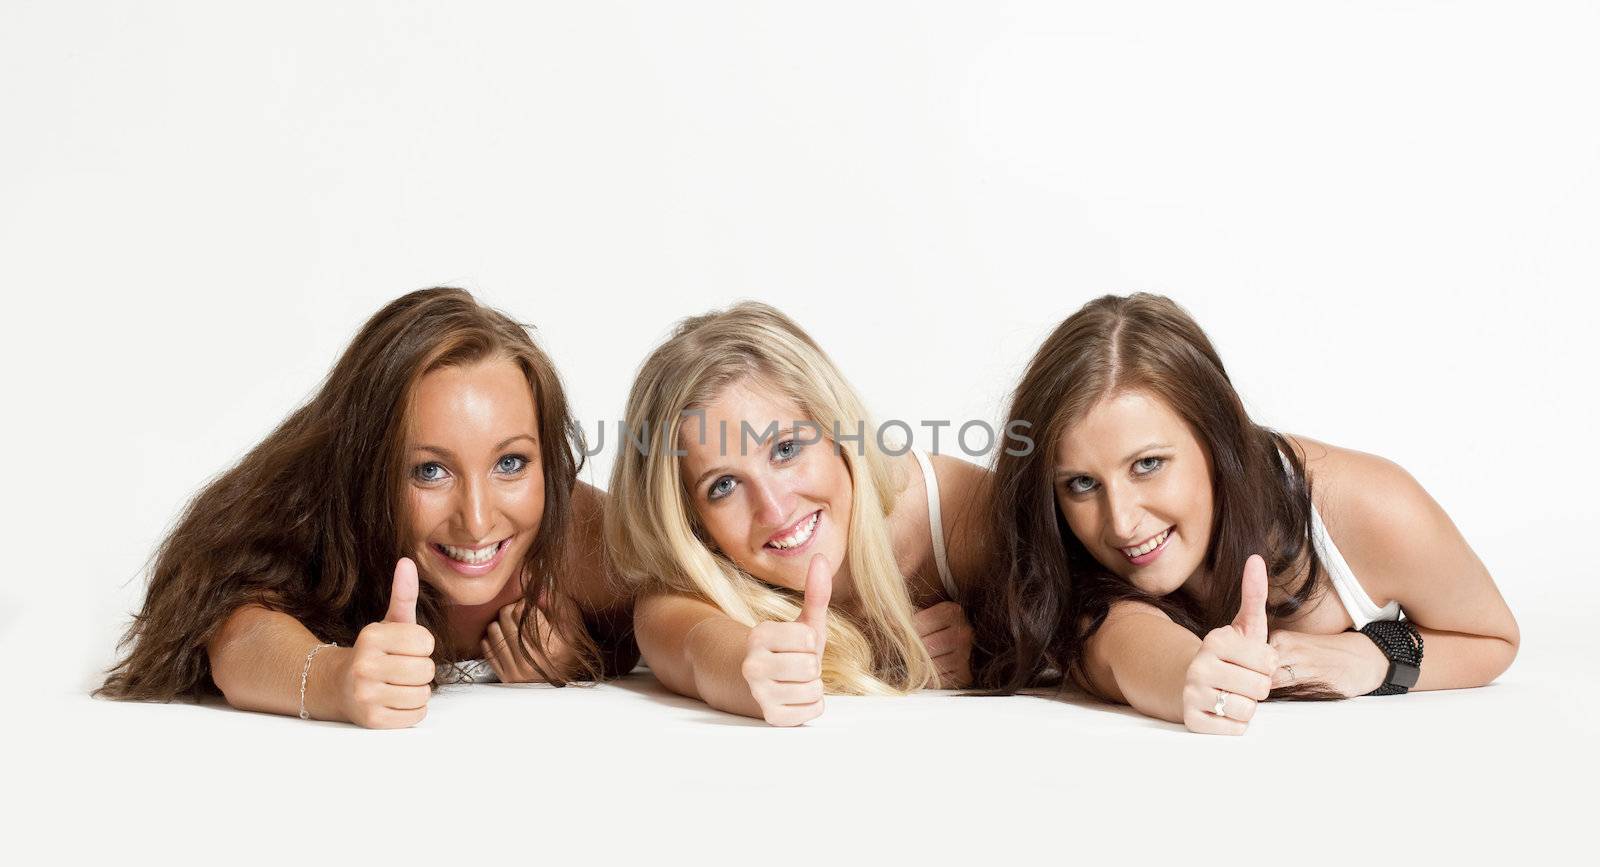 three young female friends lying on the floor showing thumbs up